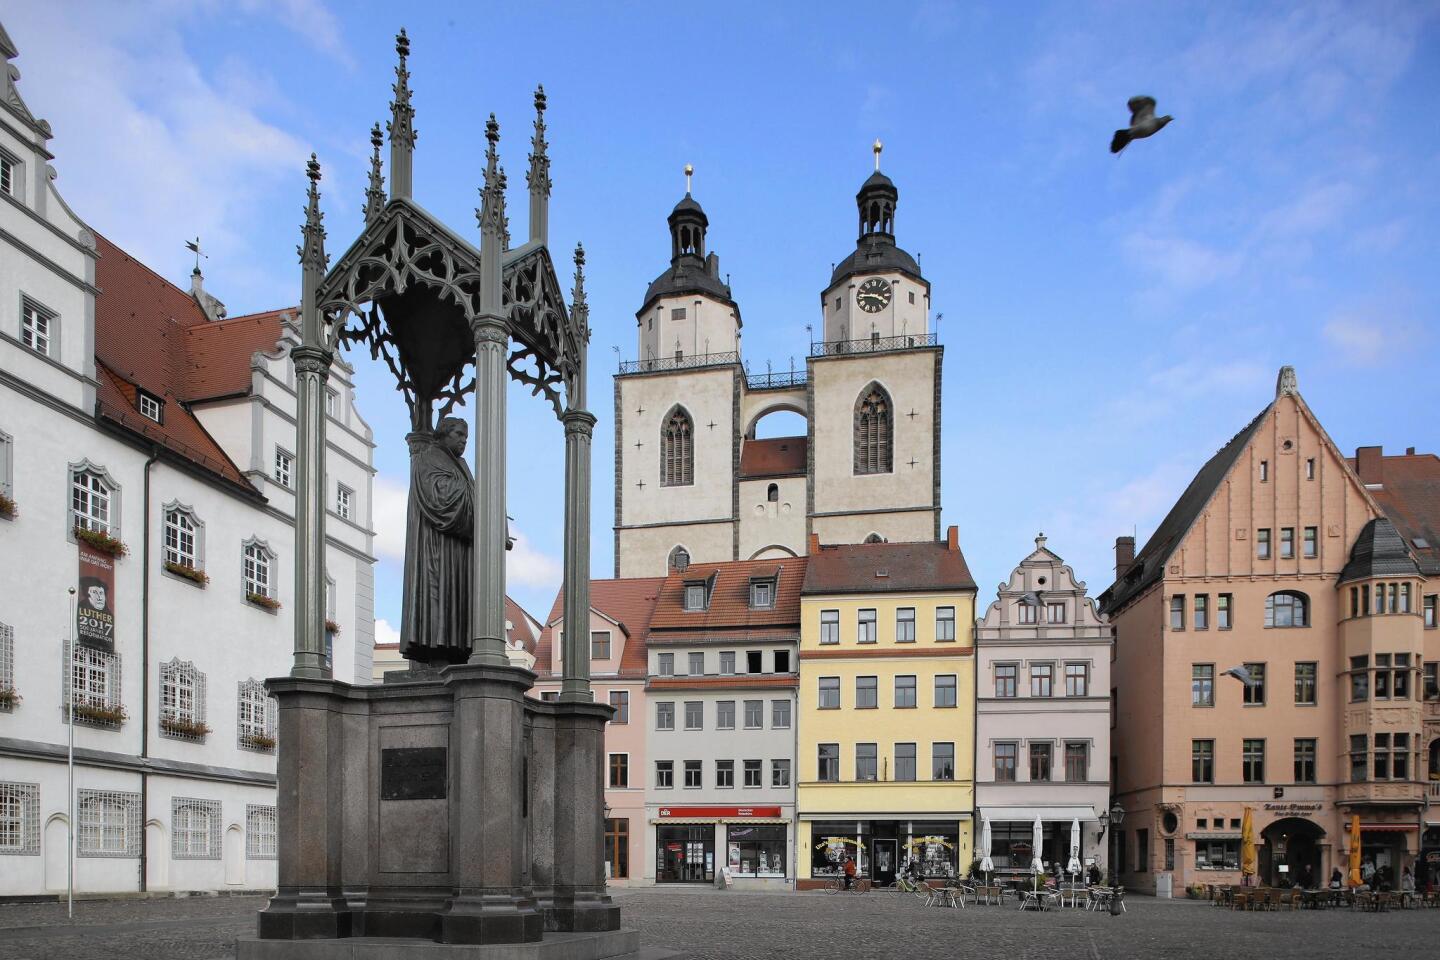 A statue of 16th-century theologian Martin Luther stands on Marktplatz square in Wittenberg, where Luther nailed his 95 theses to a door of the nearby Castle Church in 1517.